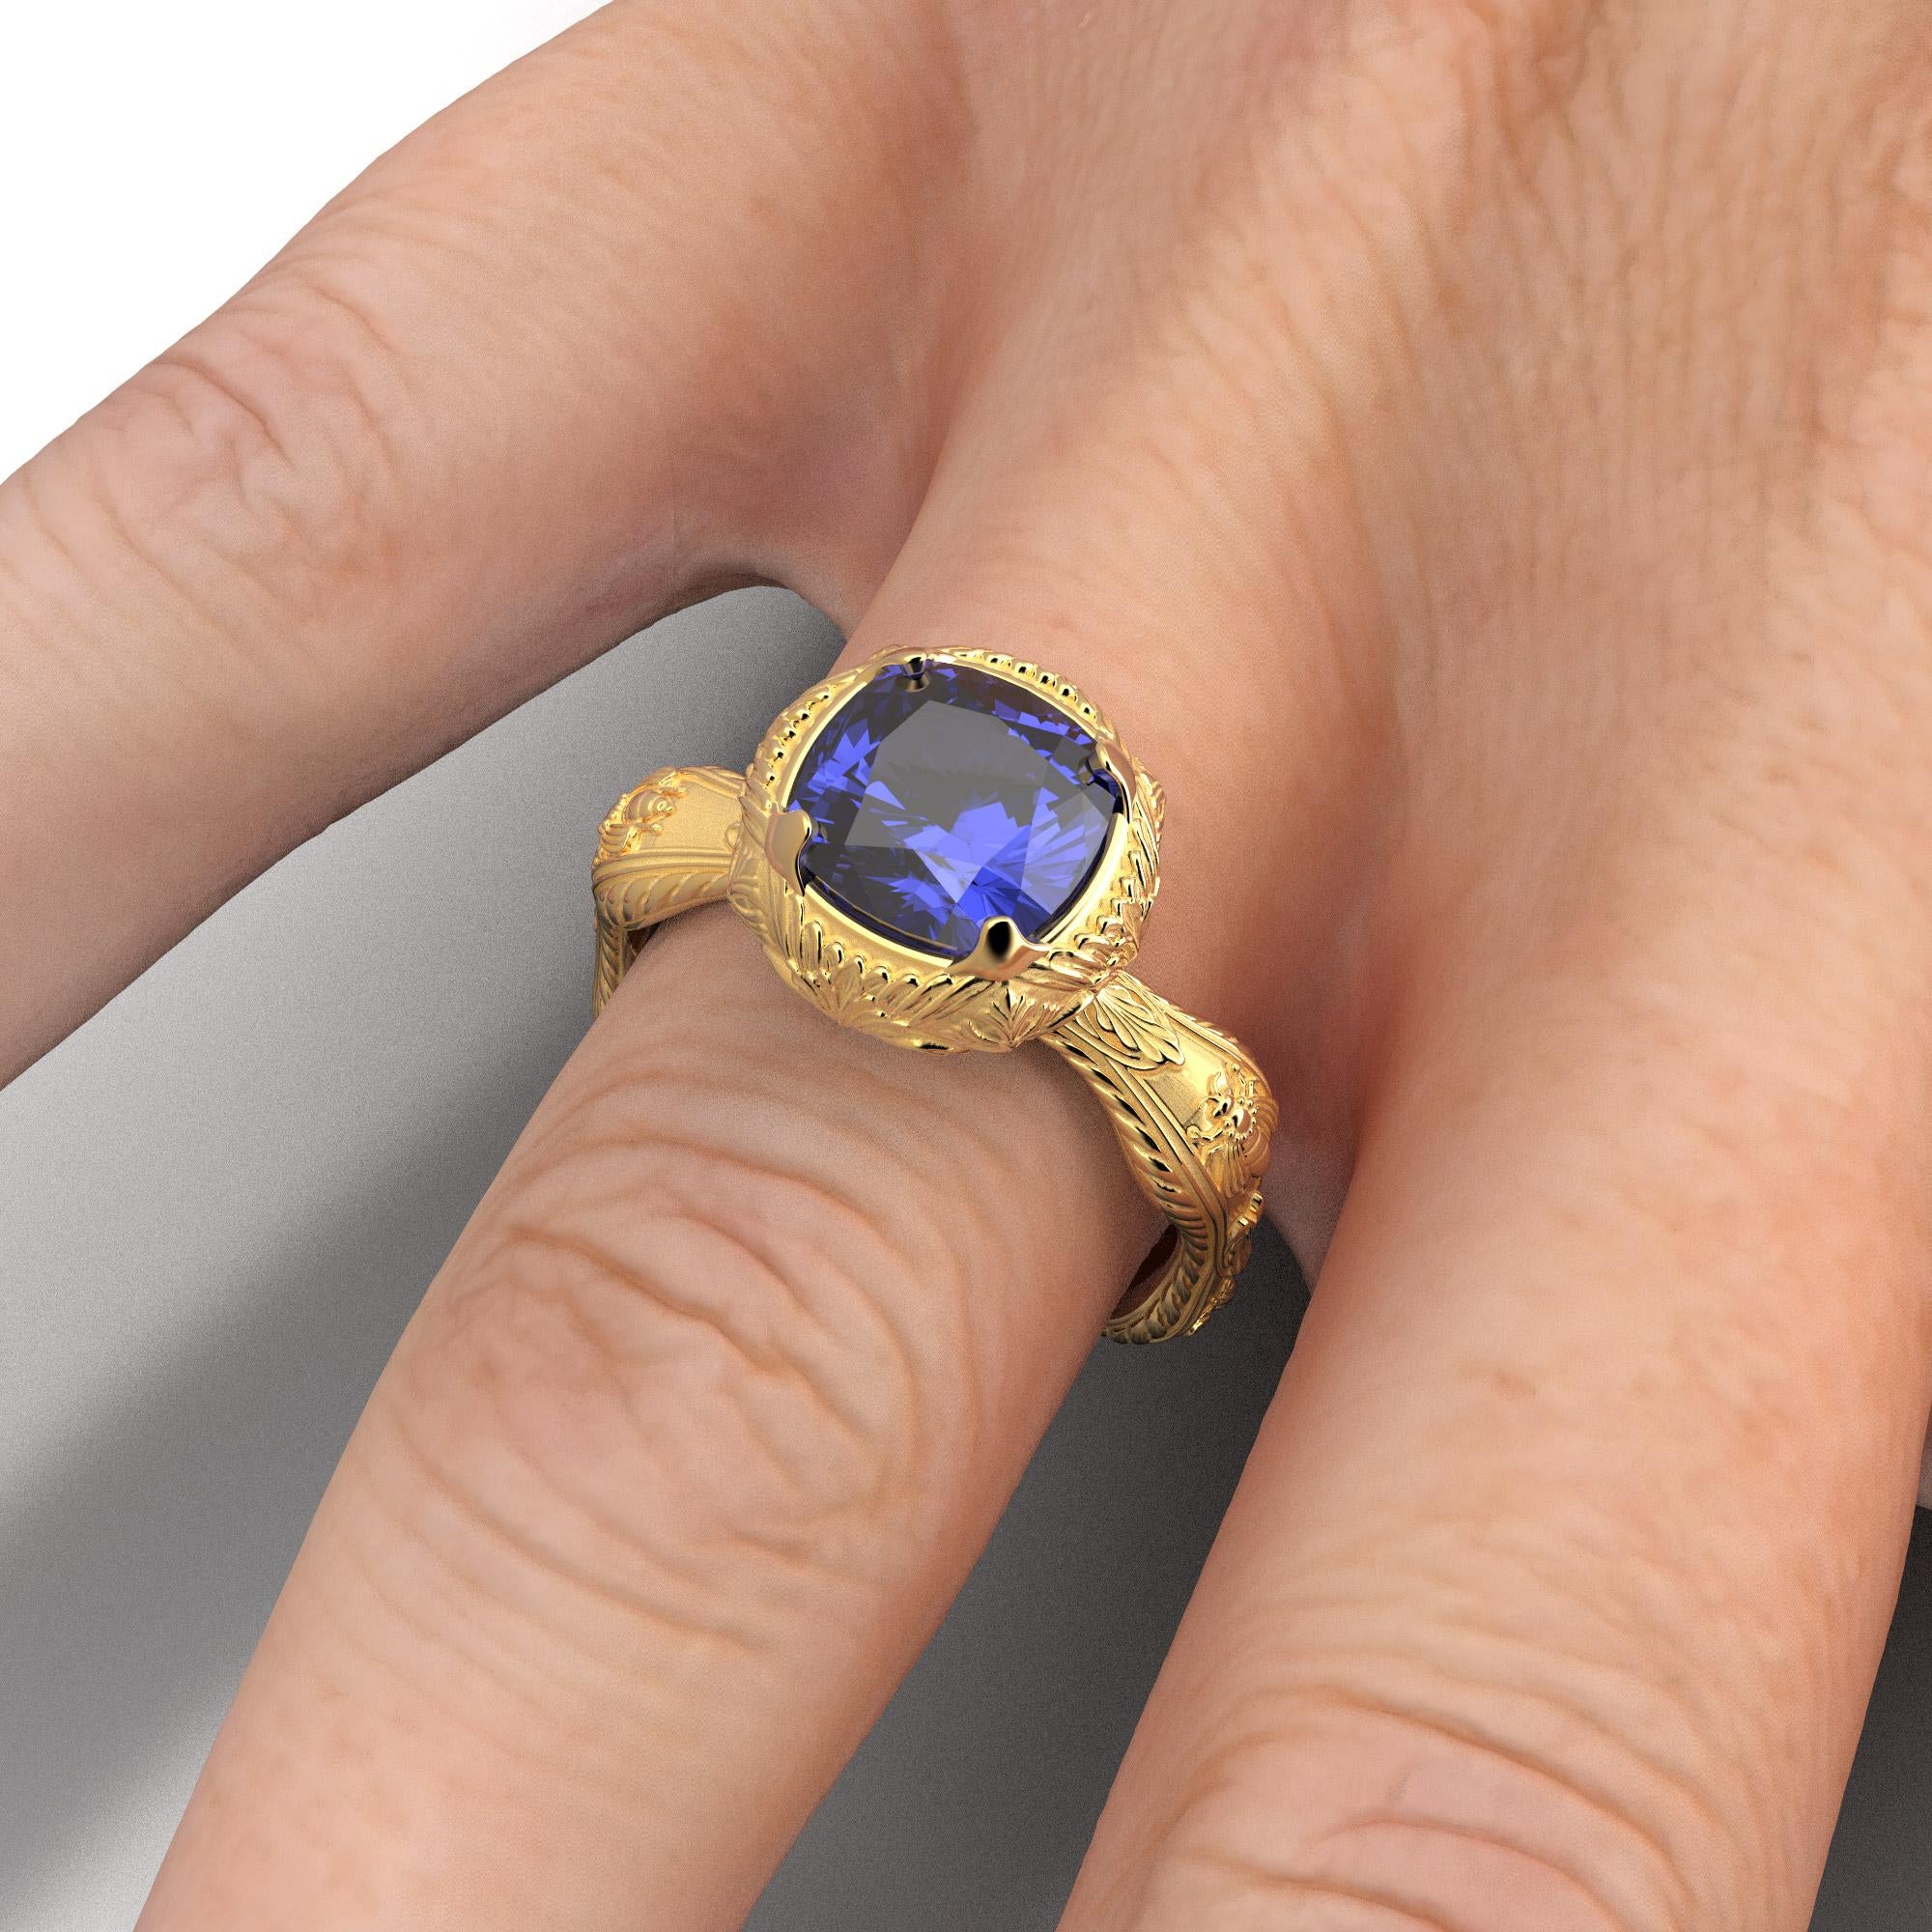 For Sale:  Top Quality Tanzanite Ring in 14k Gold Made in Italy by Oltremare Gioielli 5